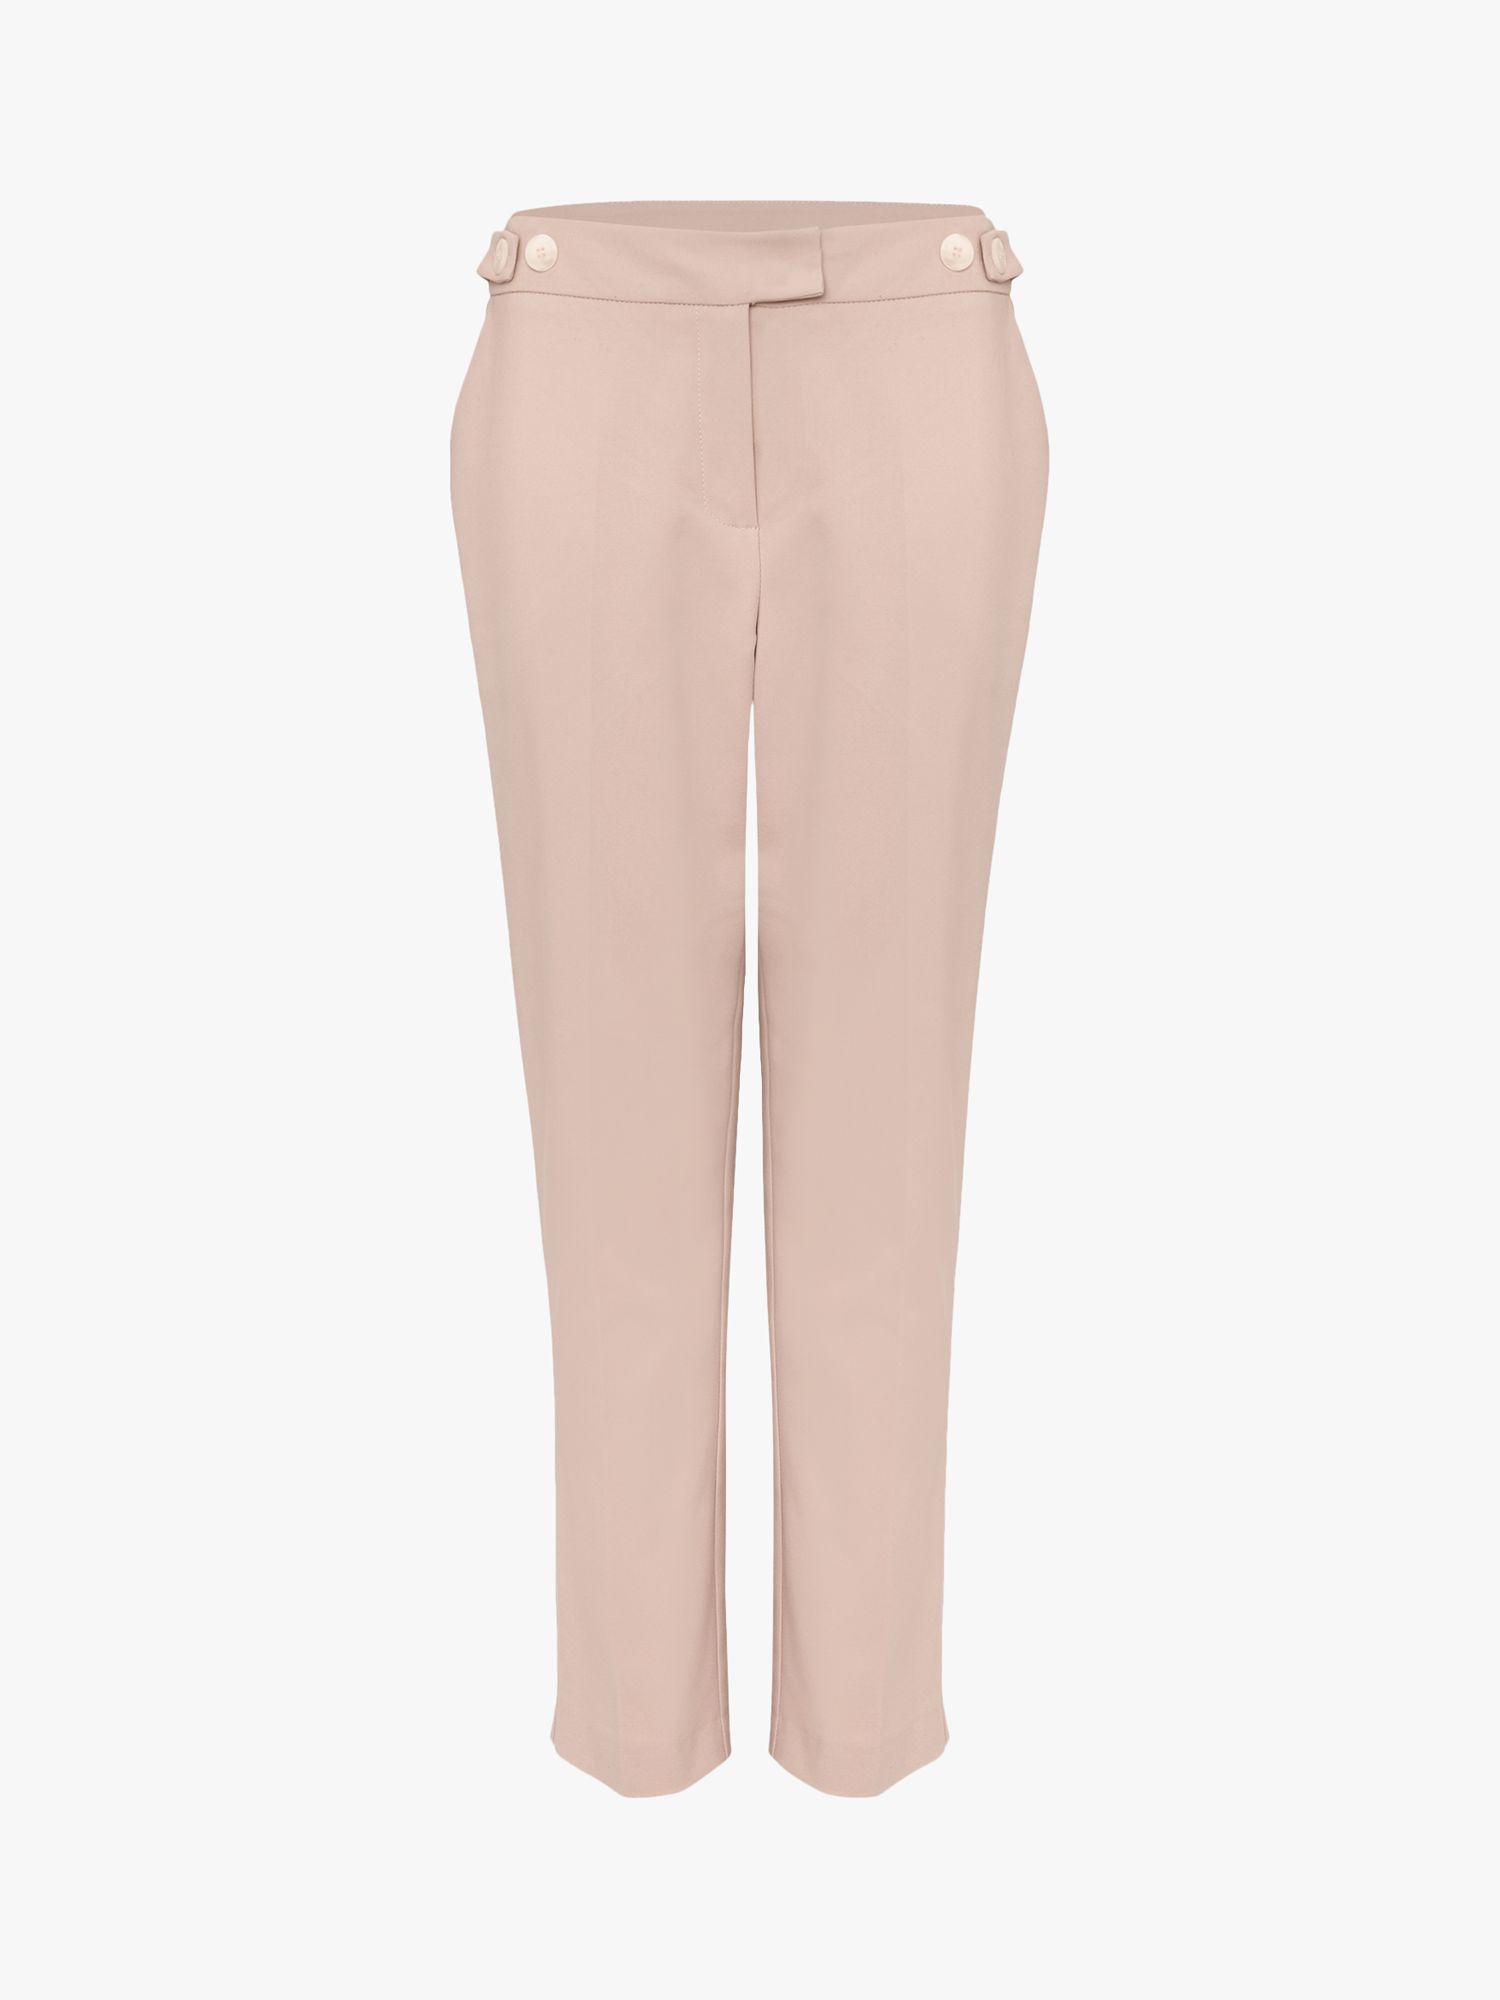 Phase Eight Ulrica Ankle Grazer Trousers, Pale Pink at John Lewis ...